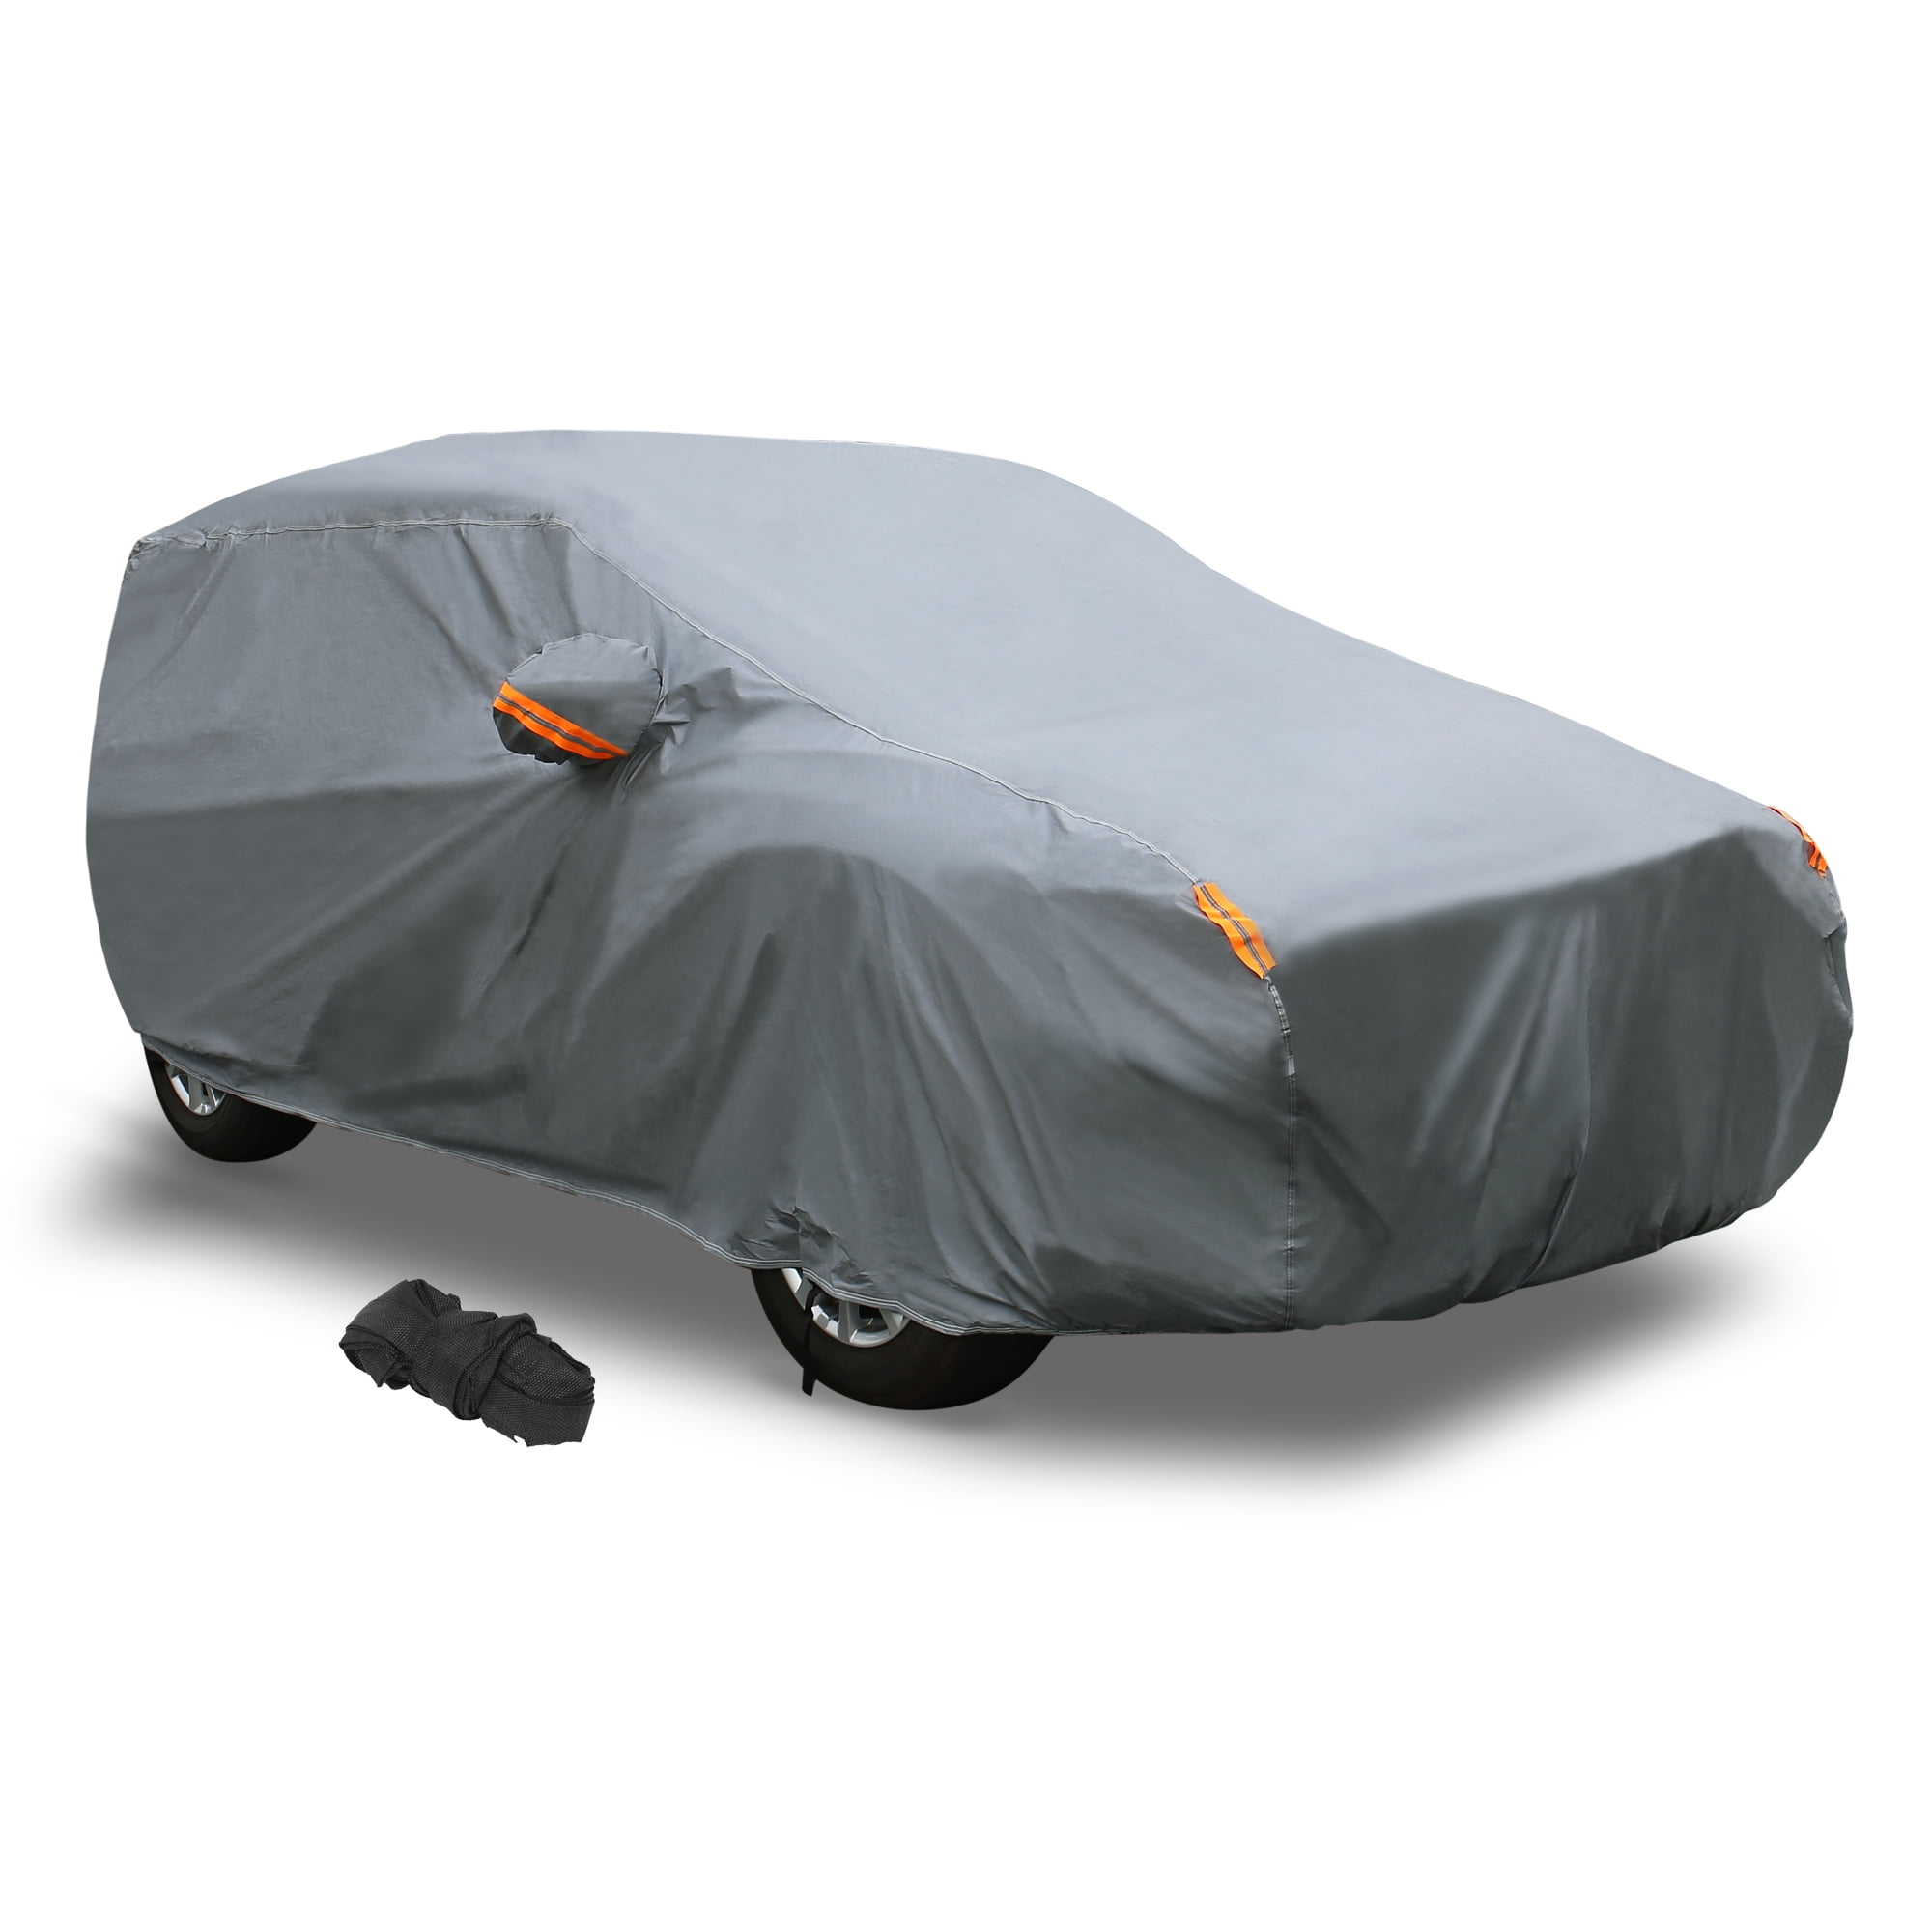 Car Cover for Sedan L (191-201), Ohuhu Universal Sedan Car Covers Outdoor  UV Protection Auto Cover - Windproof. Dustproof. Scratch Resistant